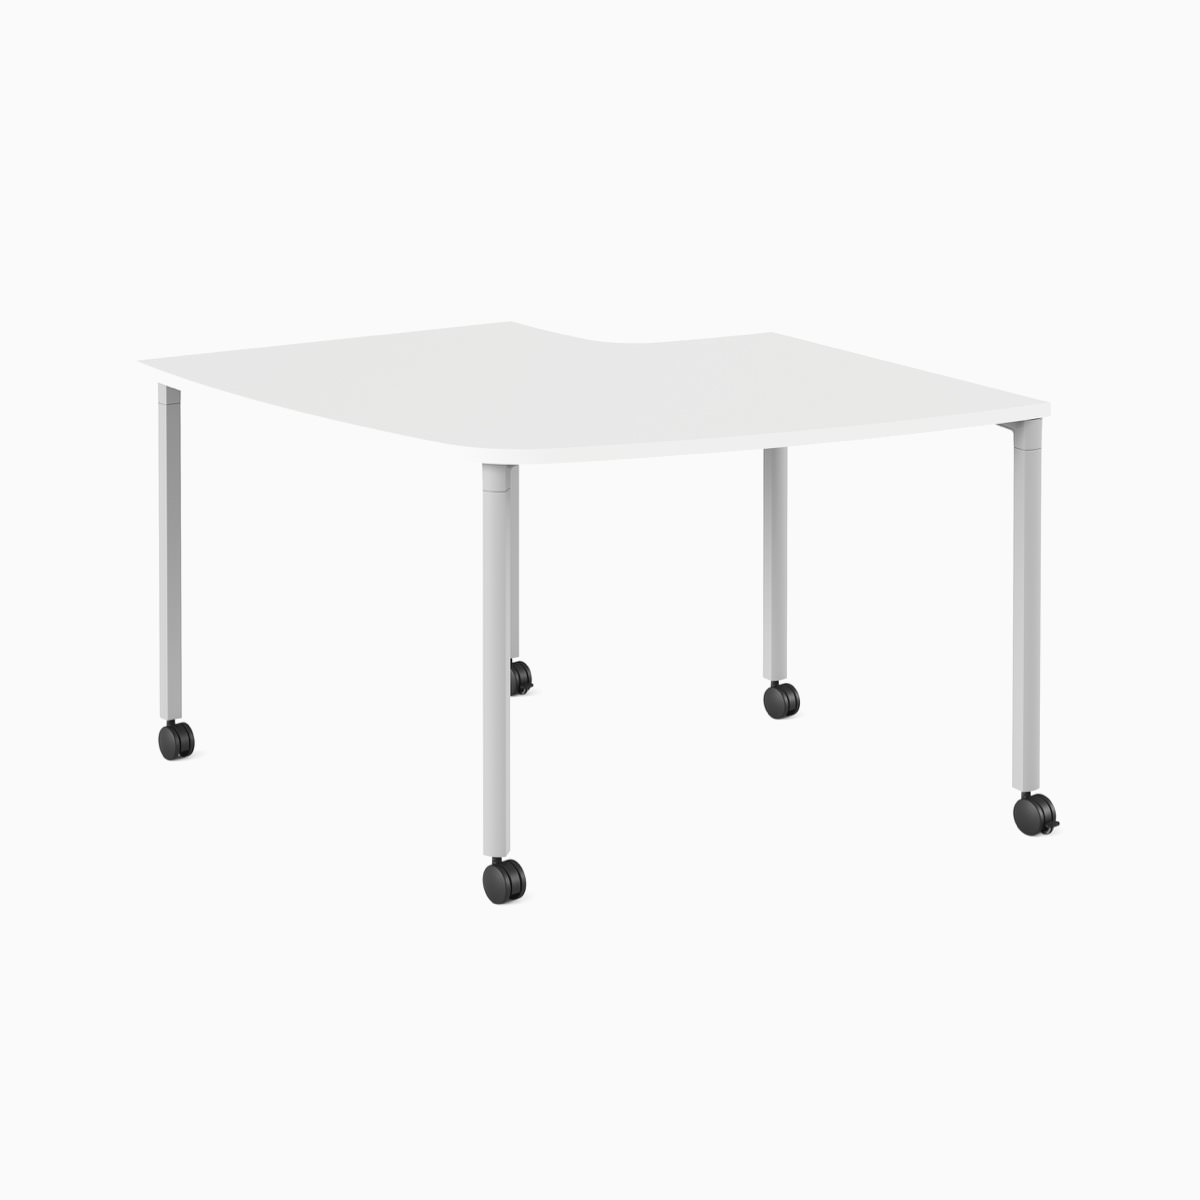 White conference curve Everywhere Table with grey legs and castors.